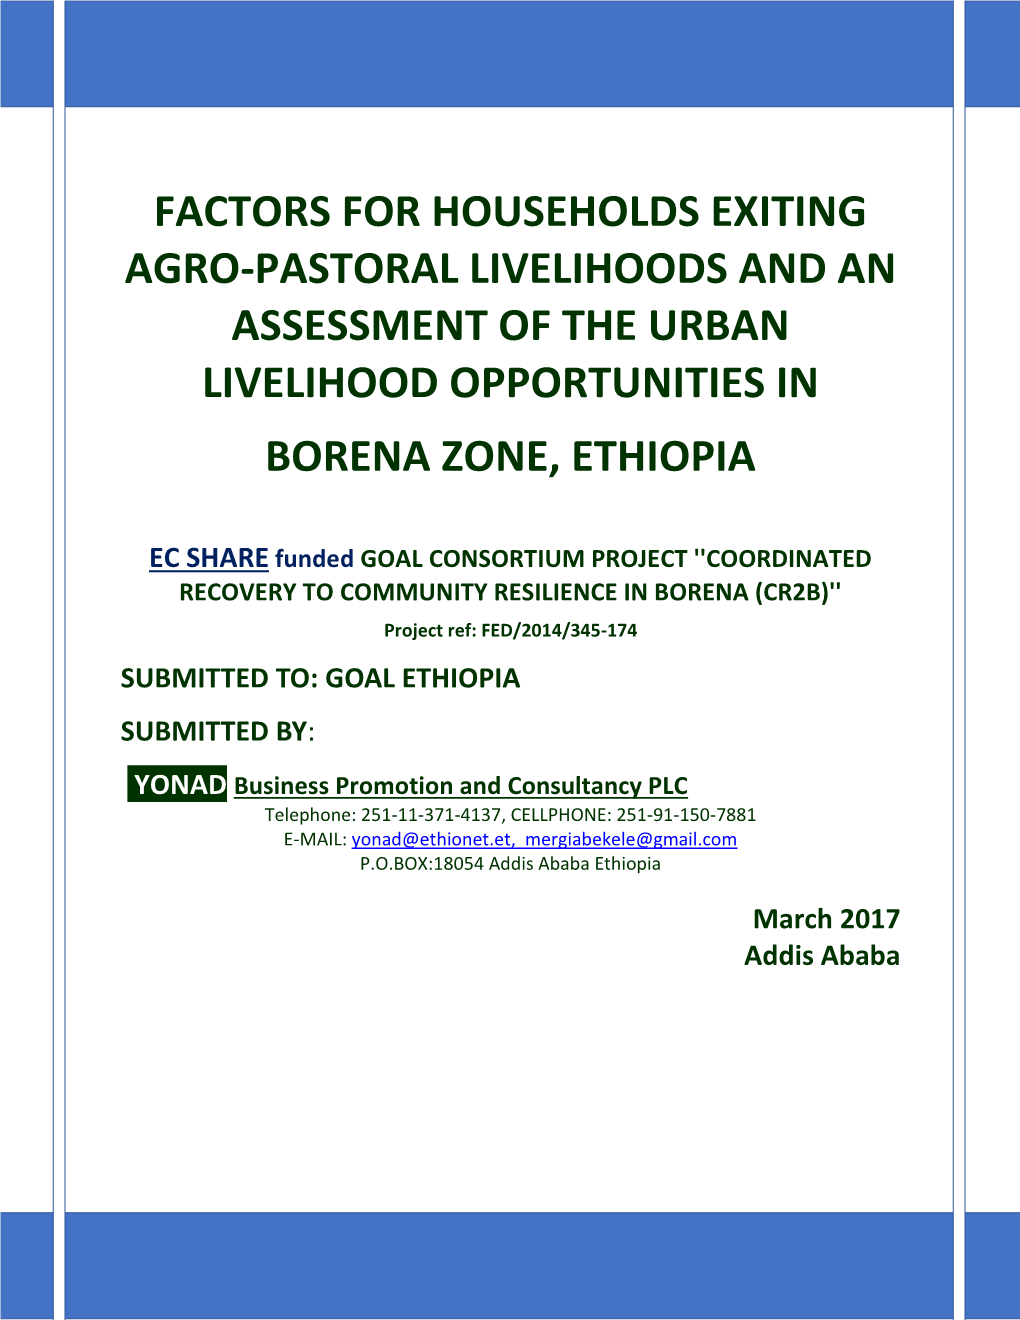 Factors for Households Exiting Agro-Pastoral Livelihoods and an Assessment of the Urban Livelihood Opportunities in Borena Zone, Ethiopia